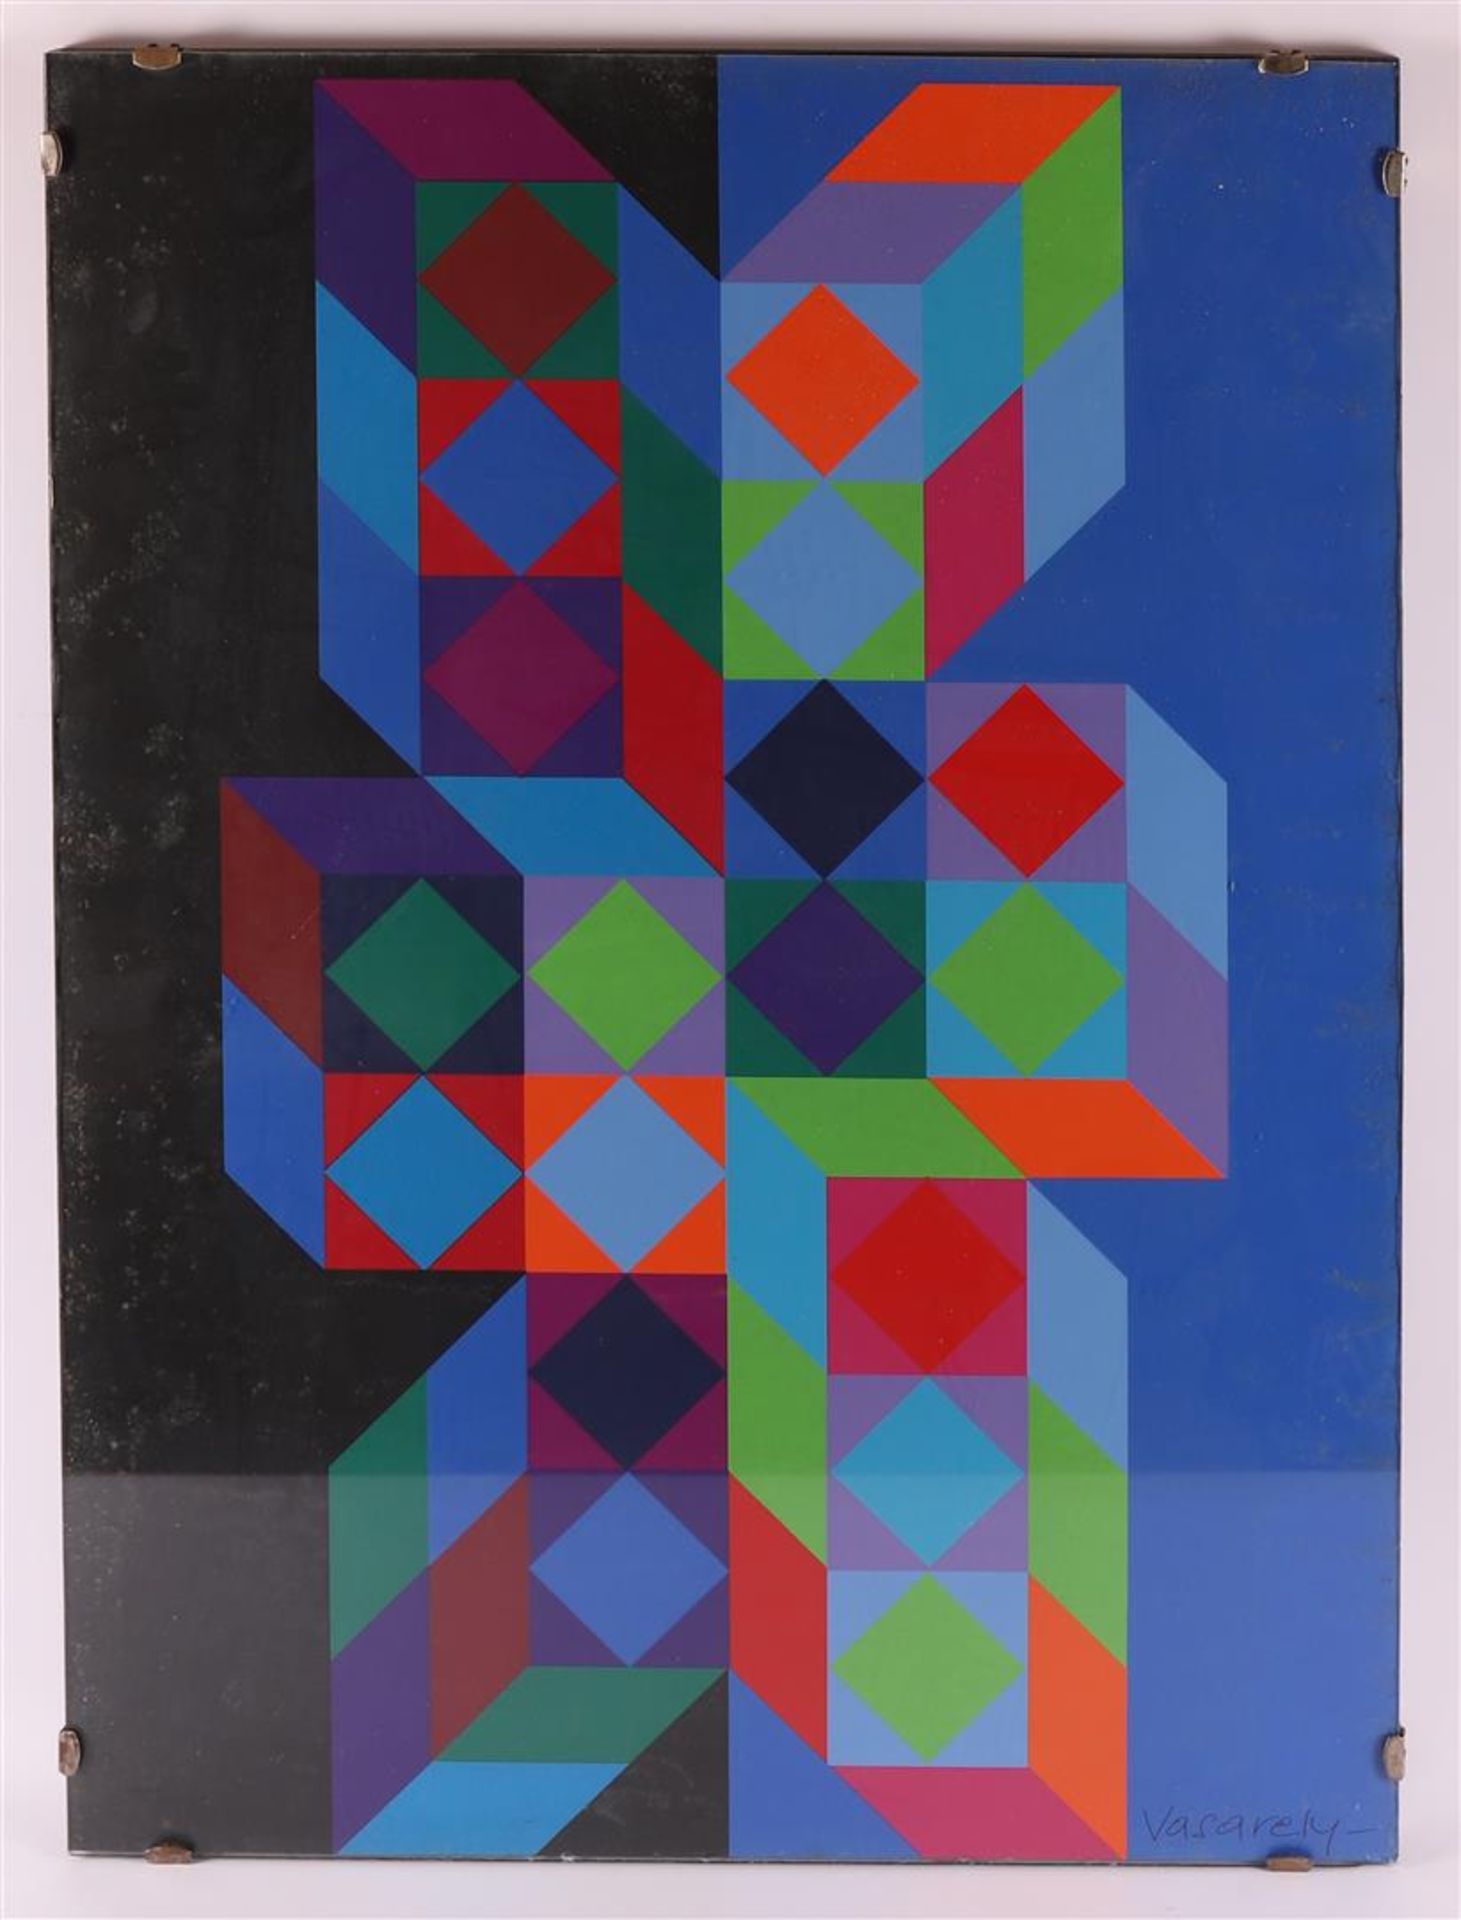 Vasarely, Victor (1906-1997) “Composition”,